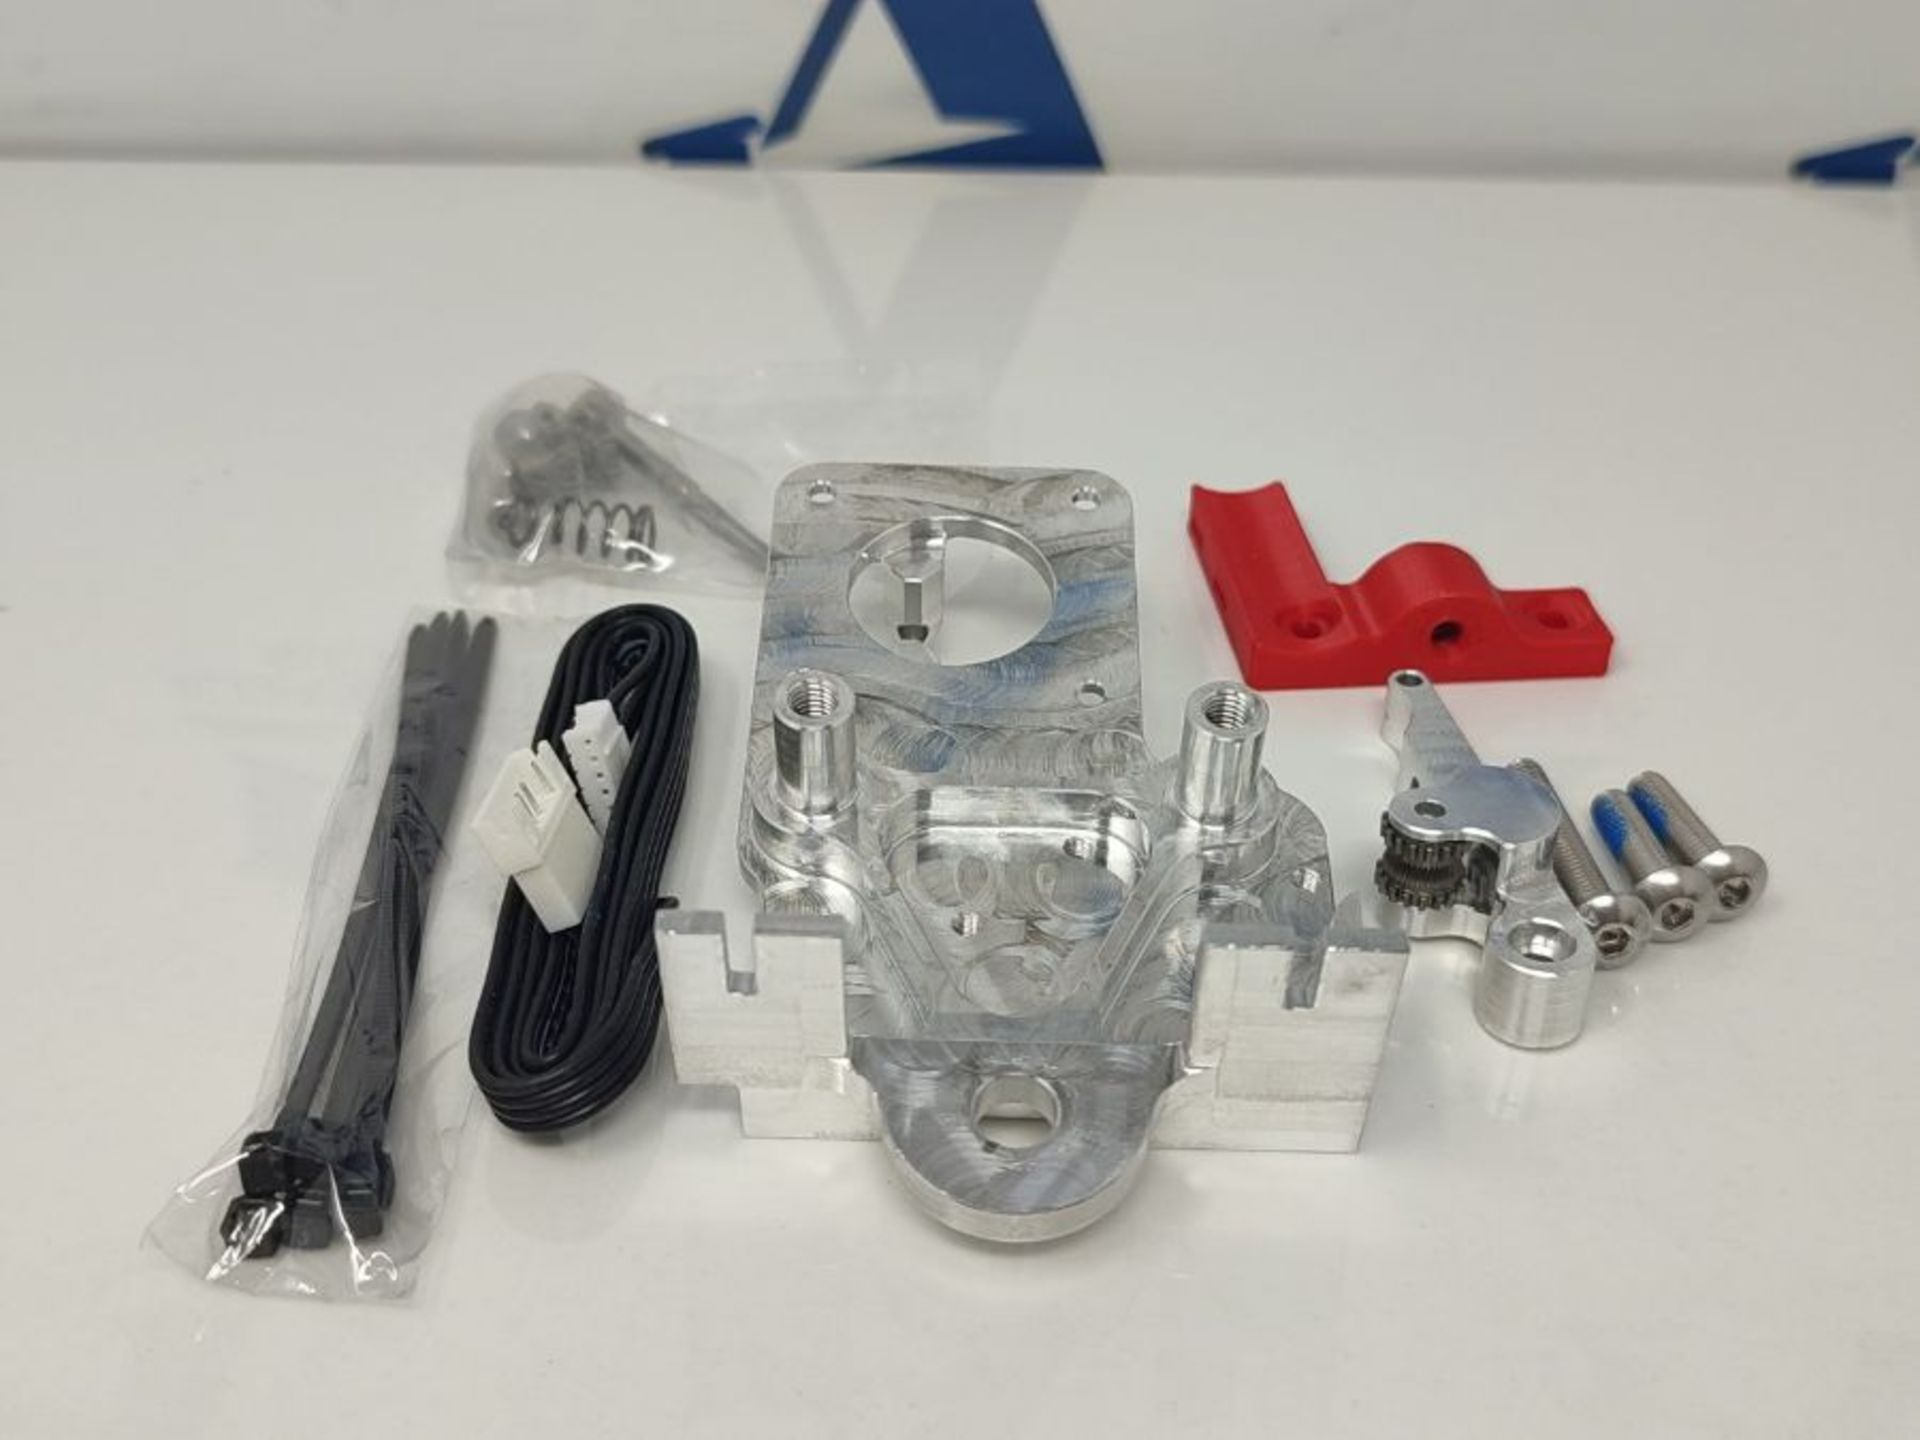 RRP £70.00 Micro Swiss Direct Drive Extruder for Creality CR-10 / Ender 3 Printers - Image 2 of 2